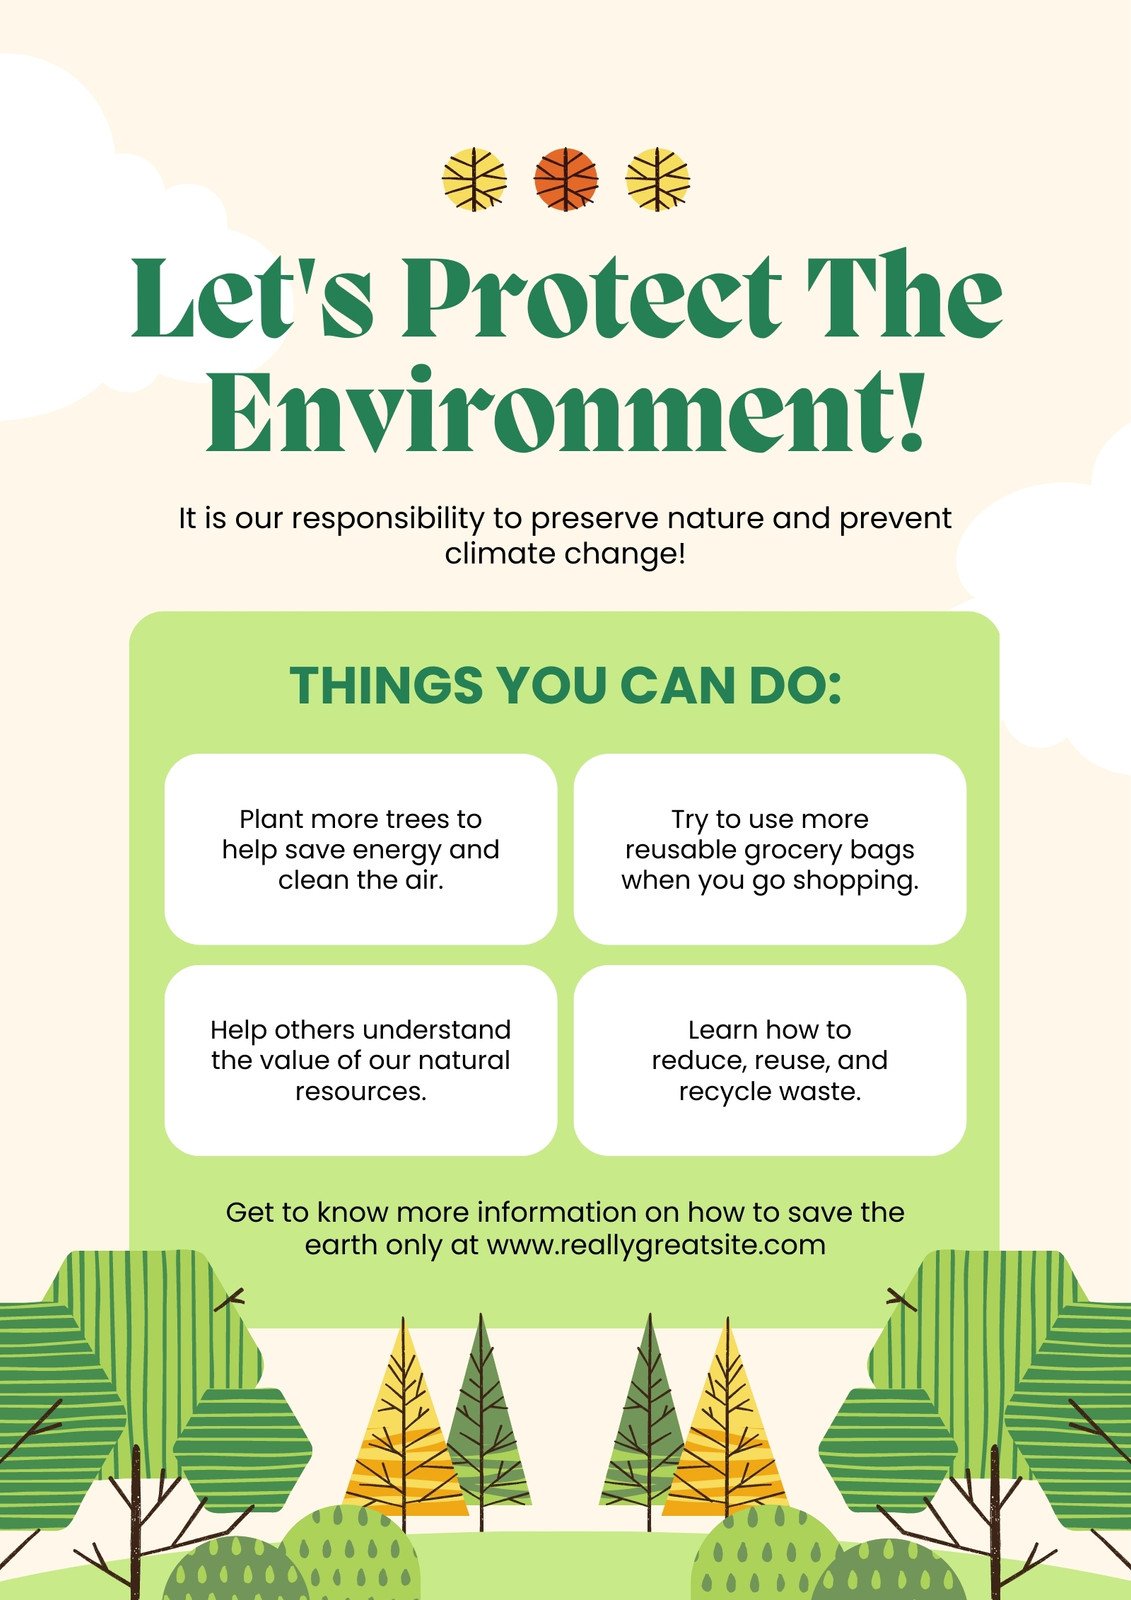 poster making ideas on environment